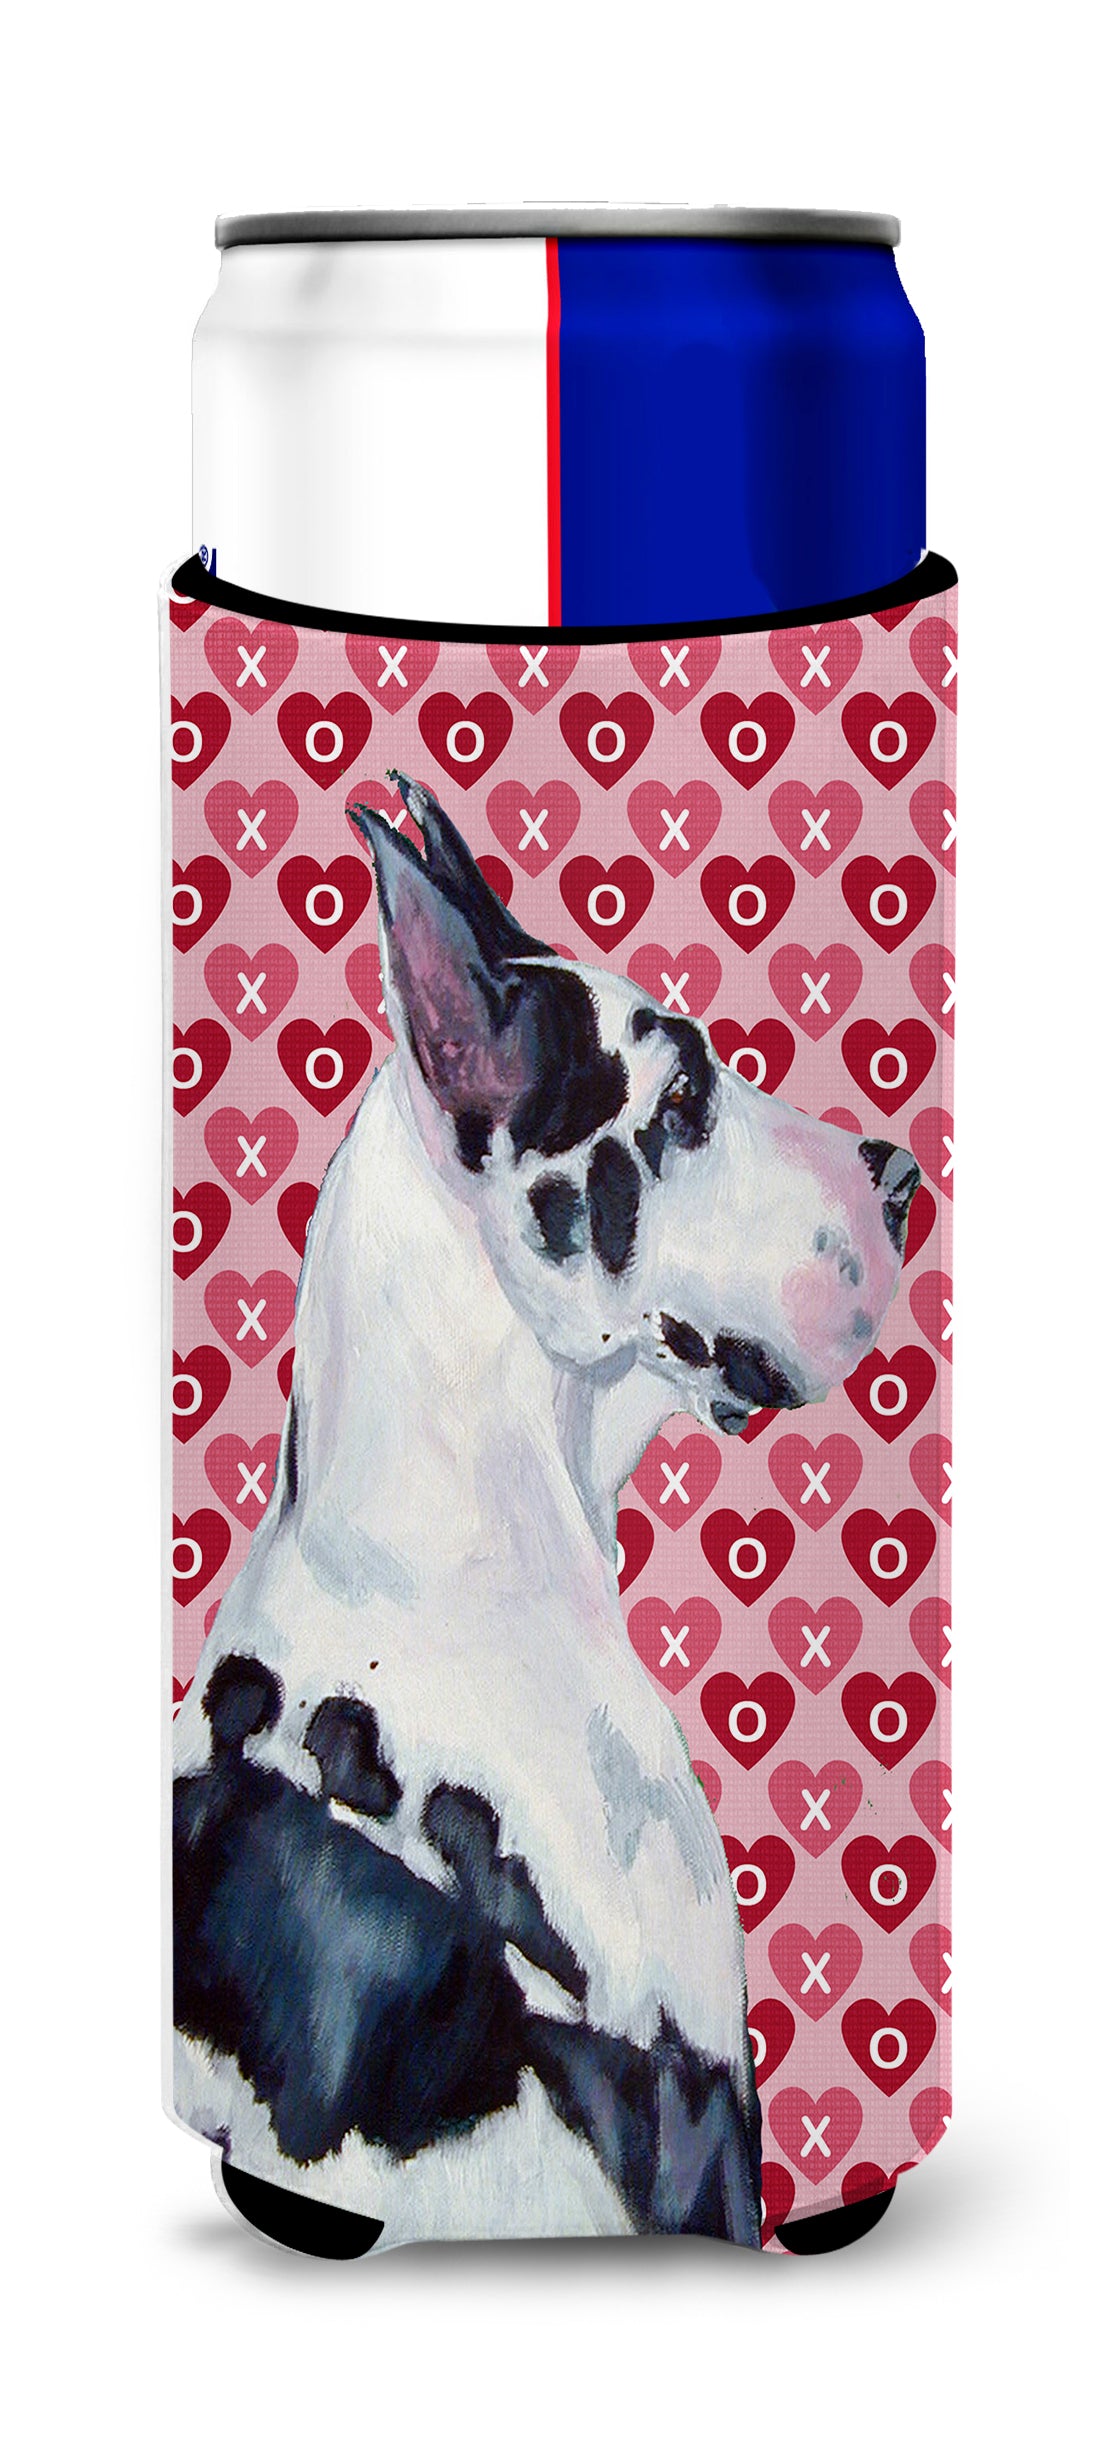 Great Dane Hearts Love and Valentine's Day Portrait Ultra Beverage Insulators for slim cans LH9146MUK